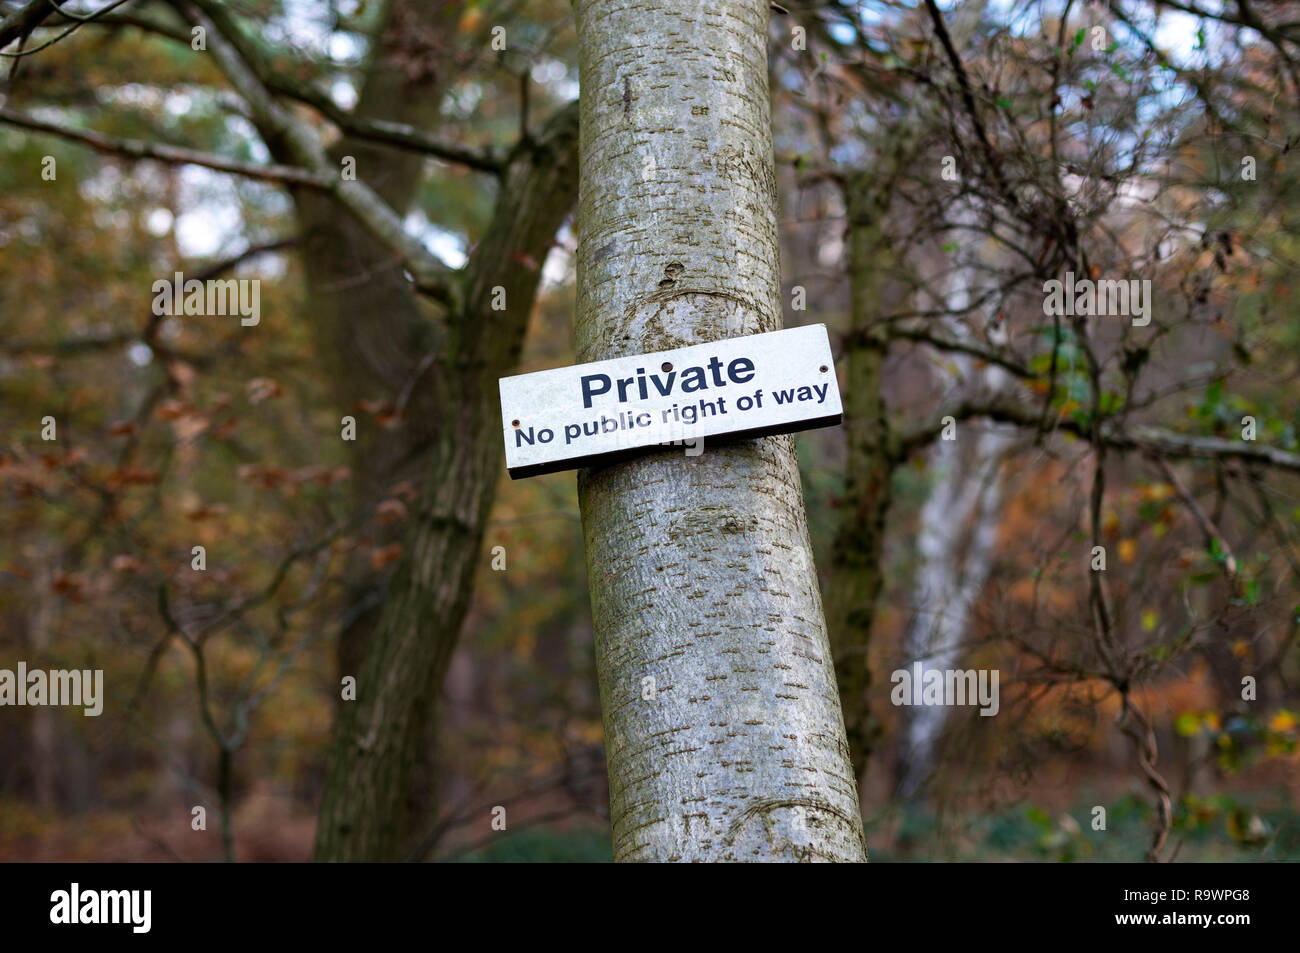 Private no public right of way sign, Butley, Suffolk, UK. Stock Photo